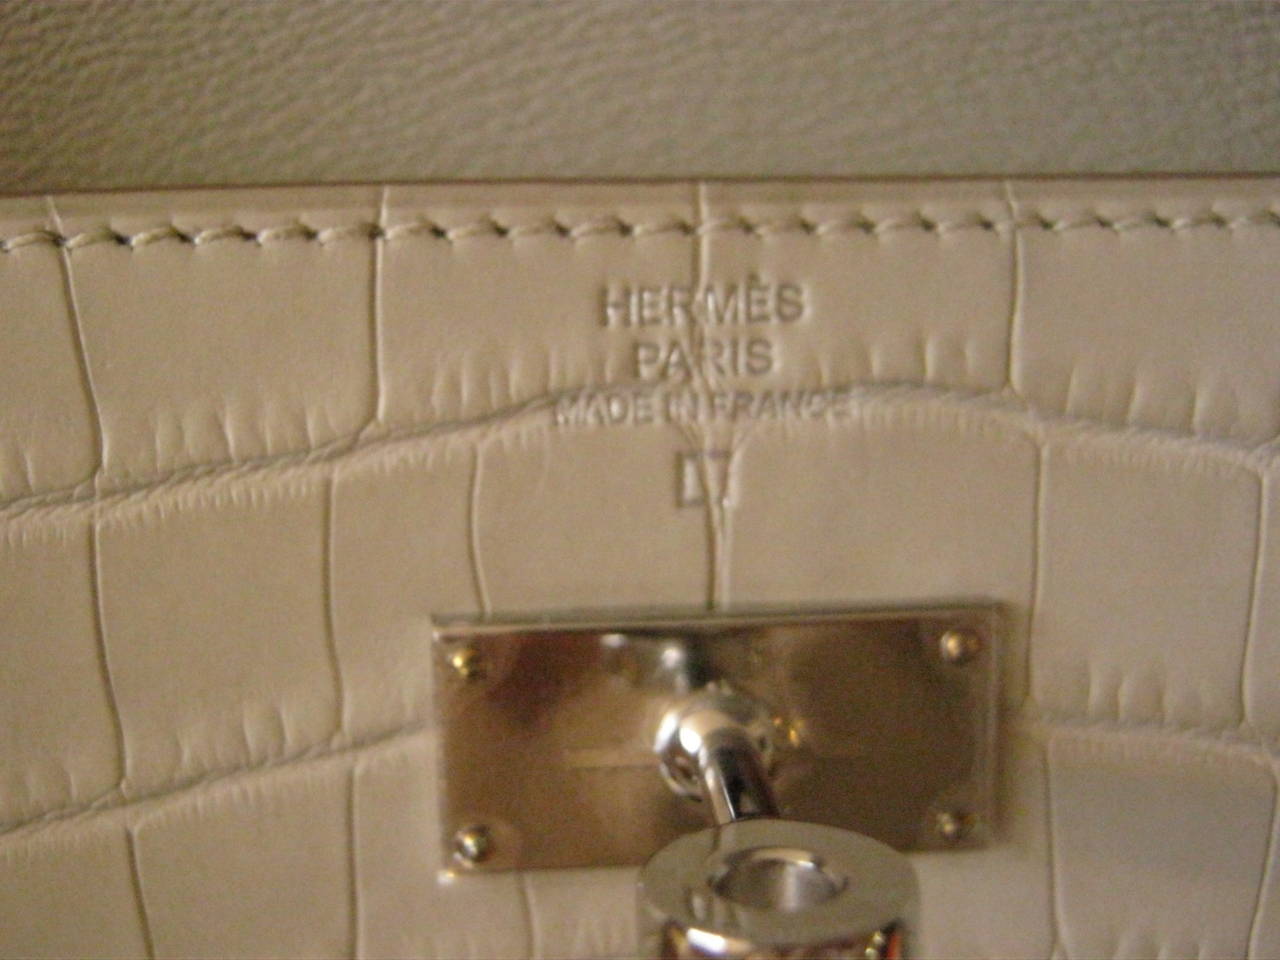 Stunning Hermes wallet which can double up as a clutch, and be used day or night. This Hermes wallet has never been used and comes with its protective felt, box and ribbon. It has palladium hardware with the plastic still on; two straps with the Q